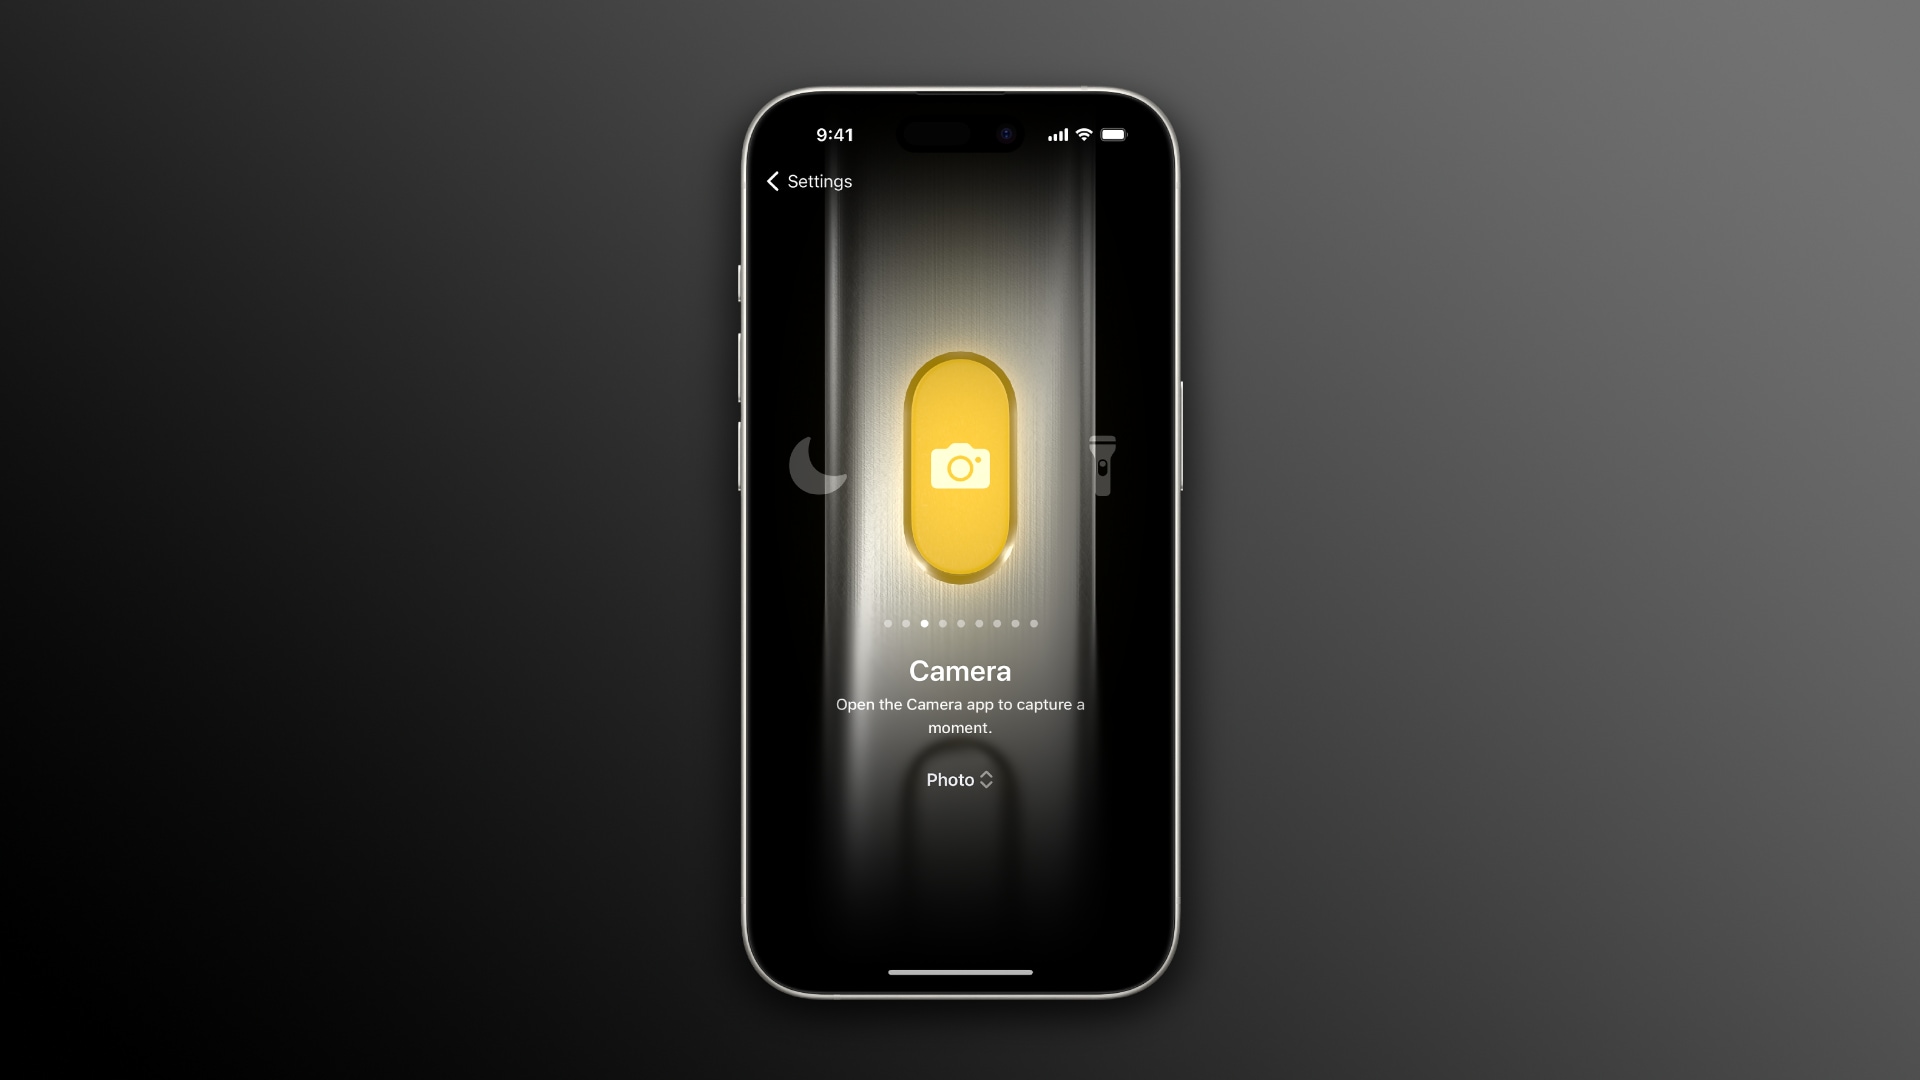 Action button customization set to Camera in the iPhone's Settings app